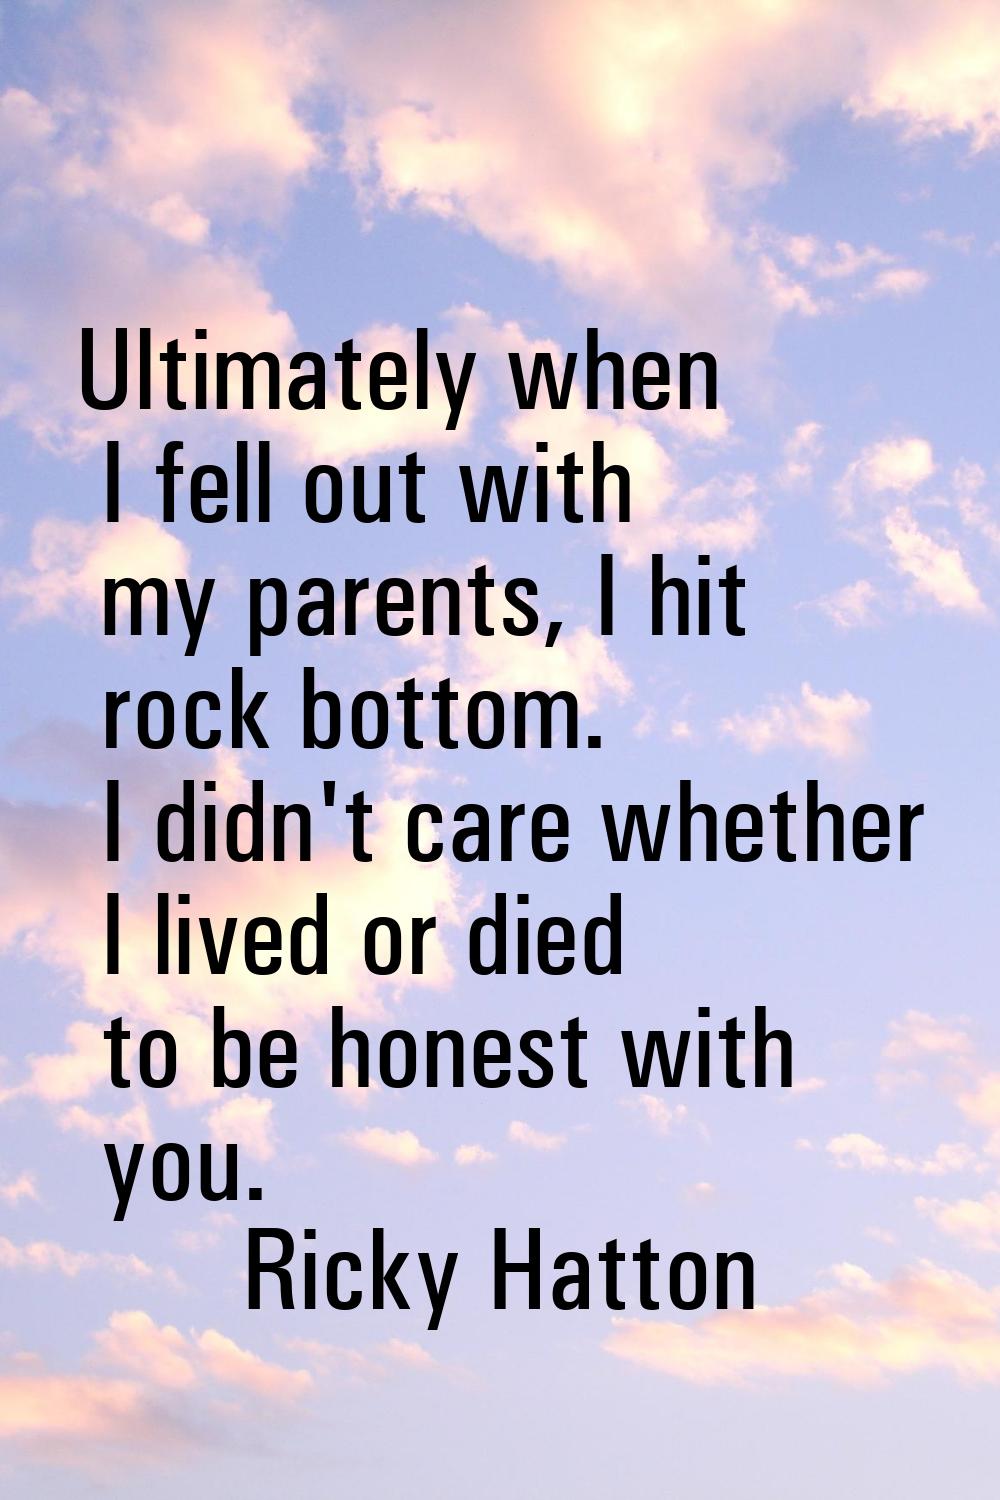 Ultimately when I fell out with my parents, I hit rock bottom. I didn't care whether I lived or die